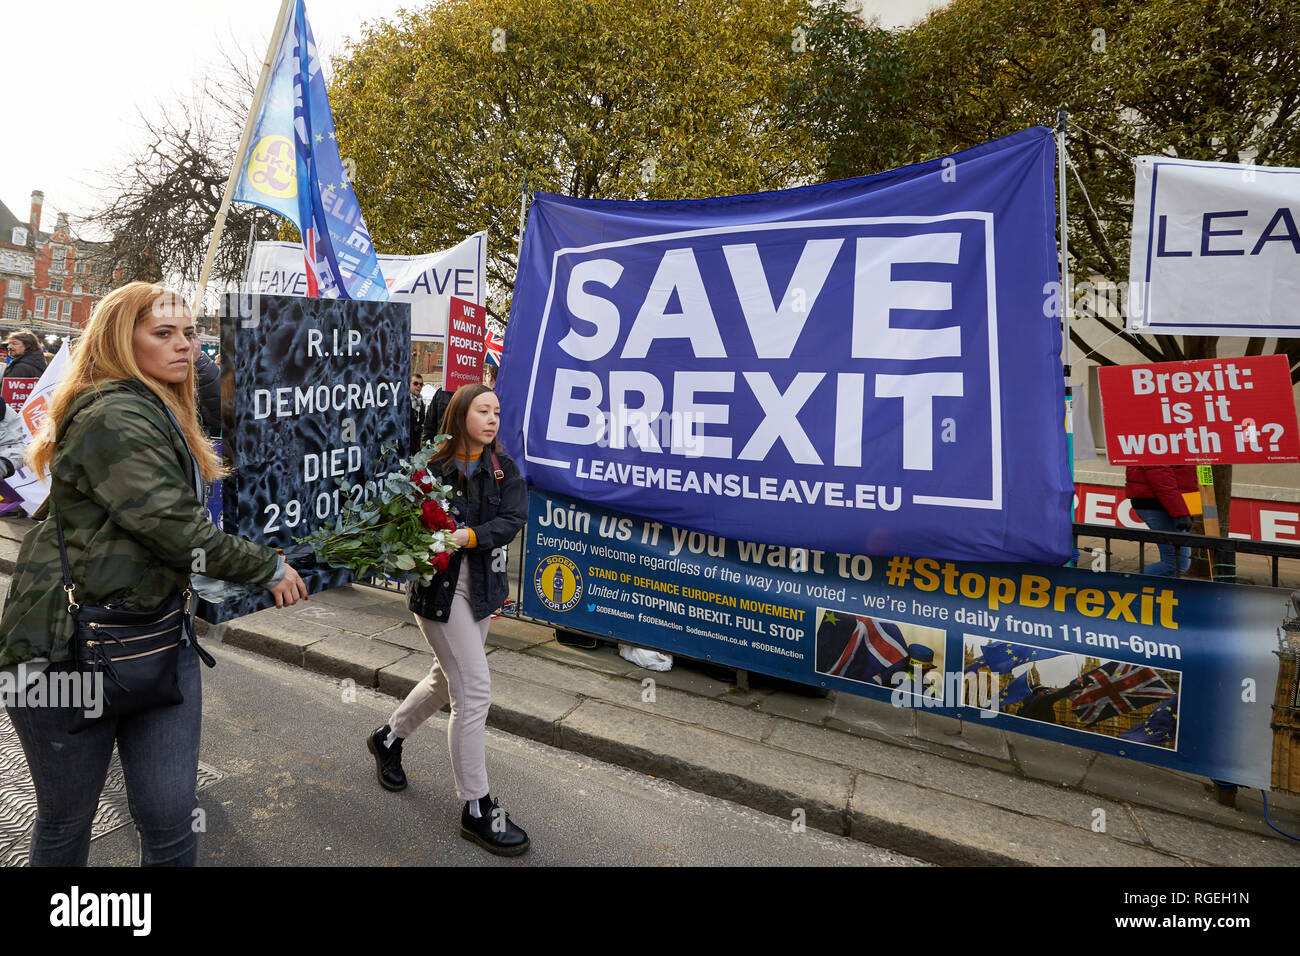 London, UK. - Jan 29, 2019: Protestors hold a funeral march outside Parliament on a crucial day for Brexit discussion inside the House of Commons. Credit: Kevin J. Frost/Alamy Live News Stock Photo